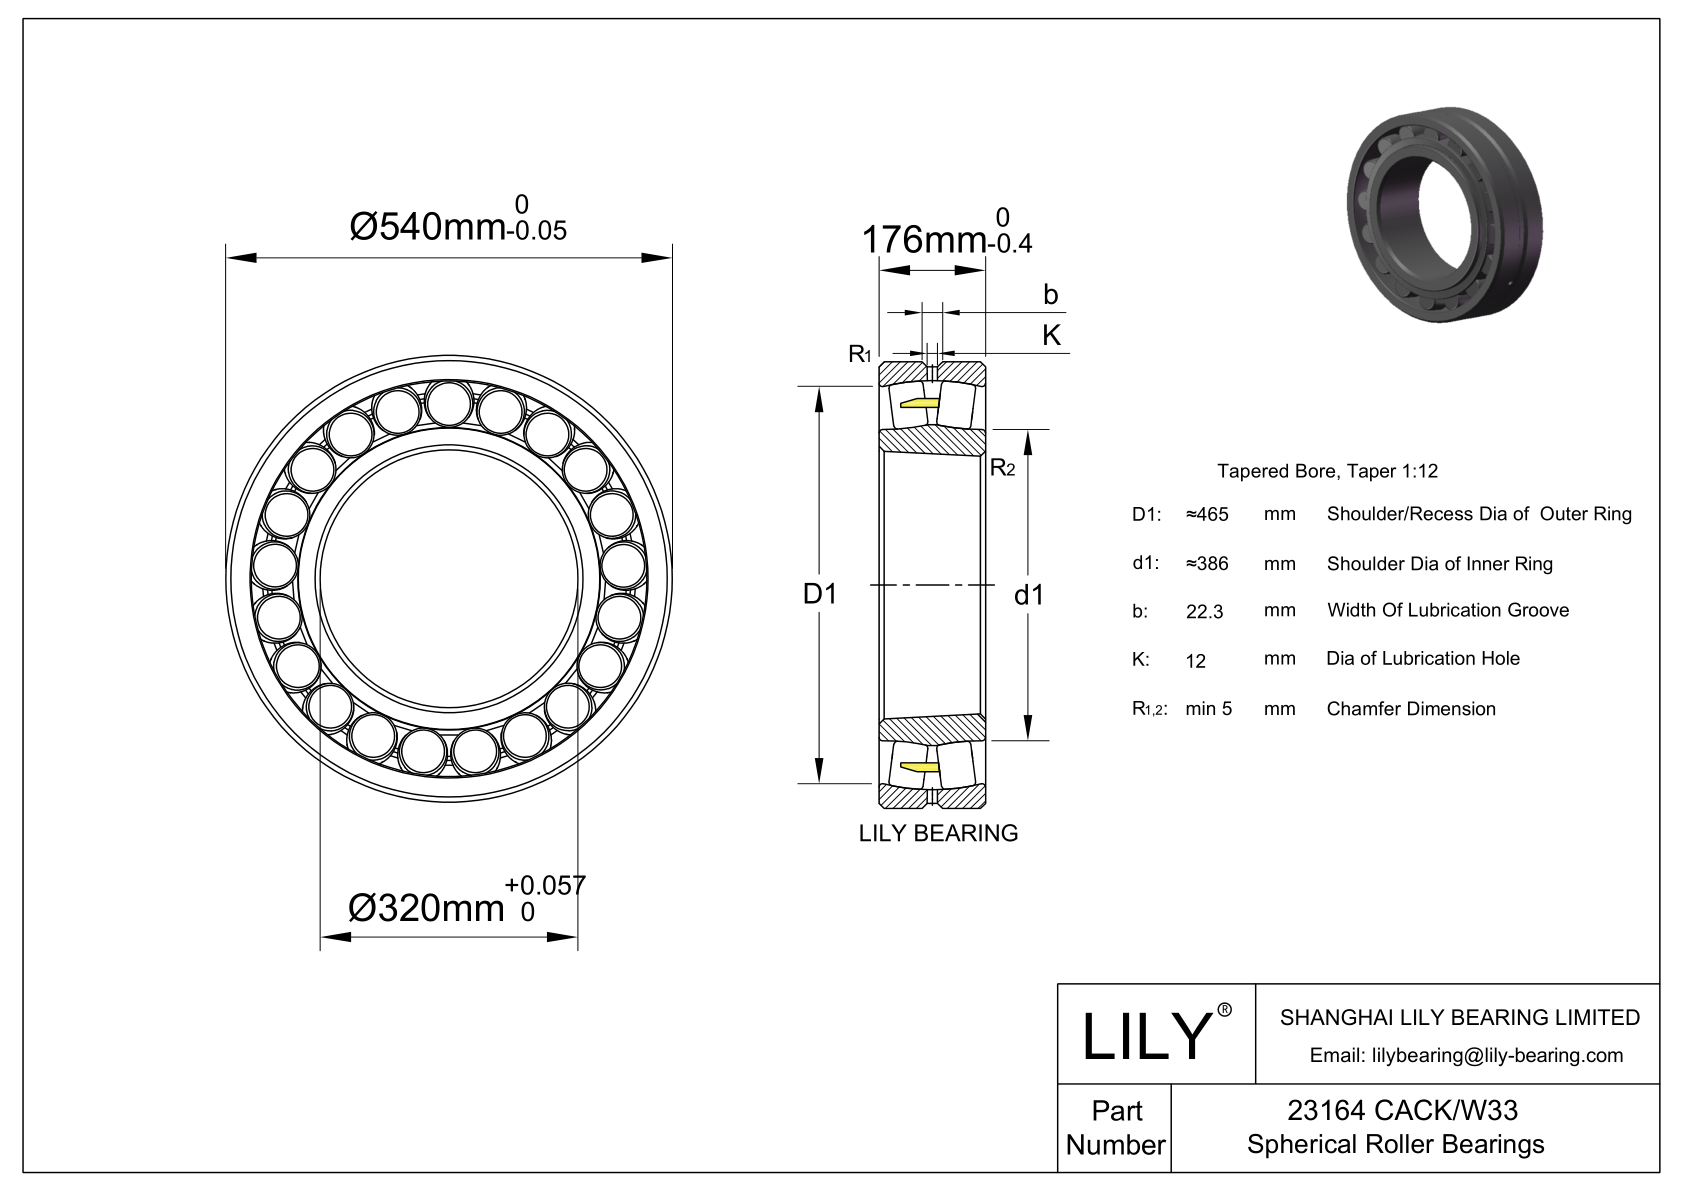 23164 CACK/W33 Double Row Spherical Roller Bearing cad drawing